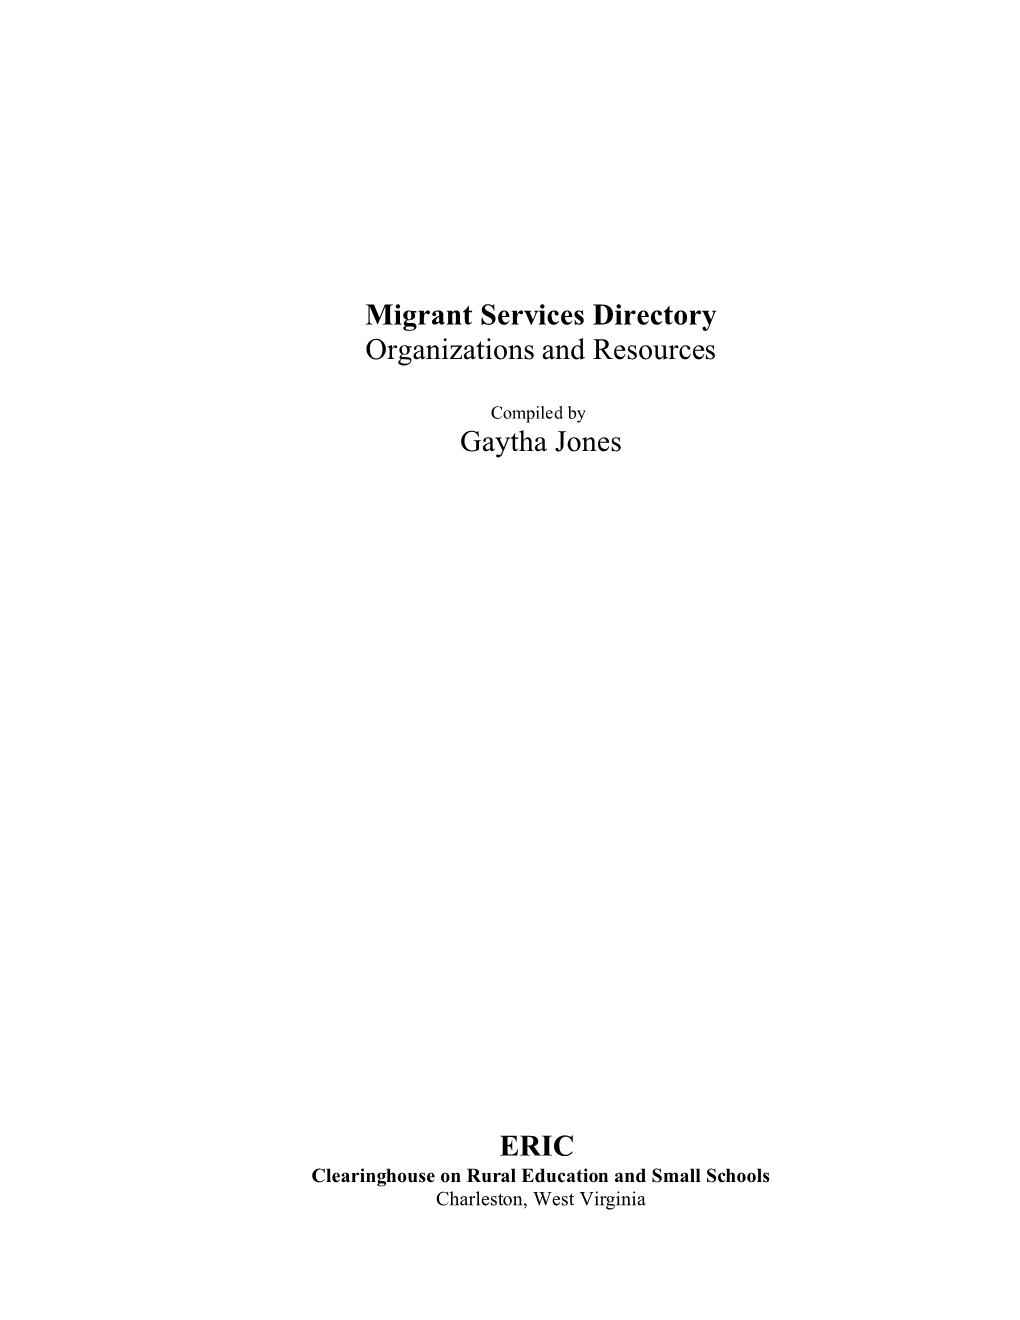 Migrant Services Directory of Organizations and Resources 2003